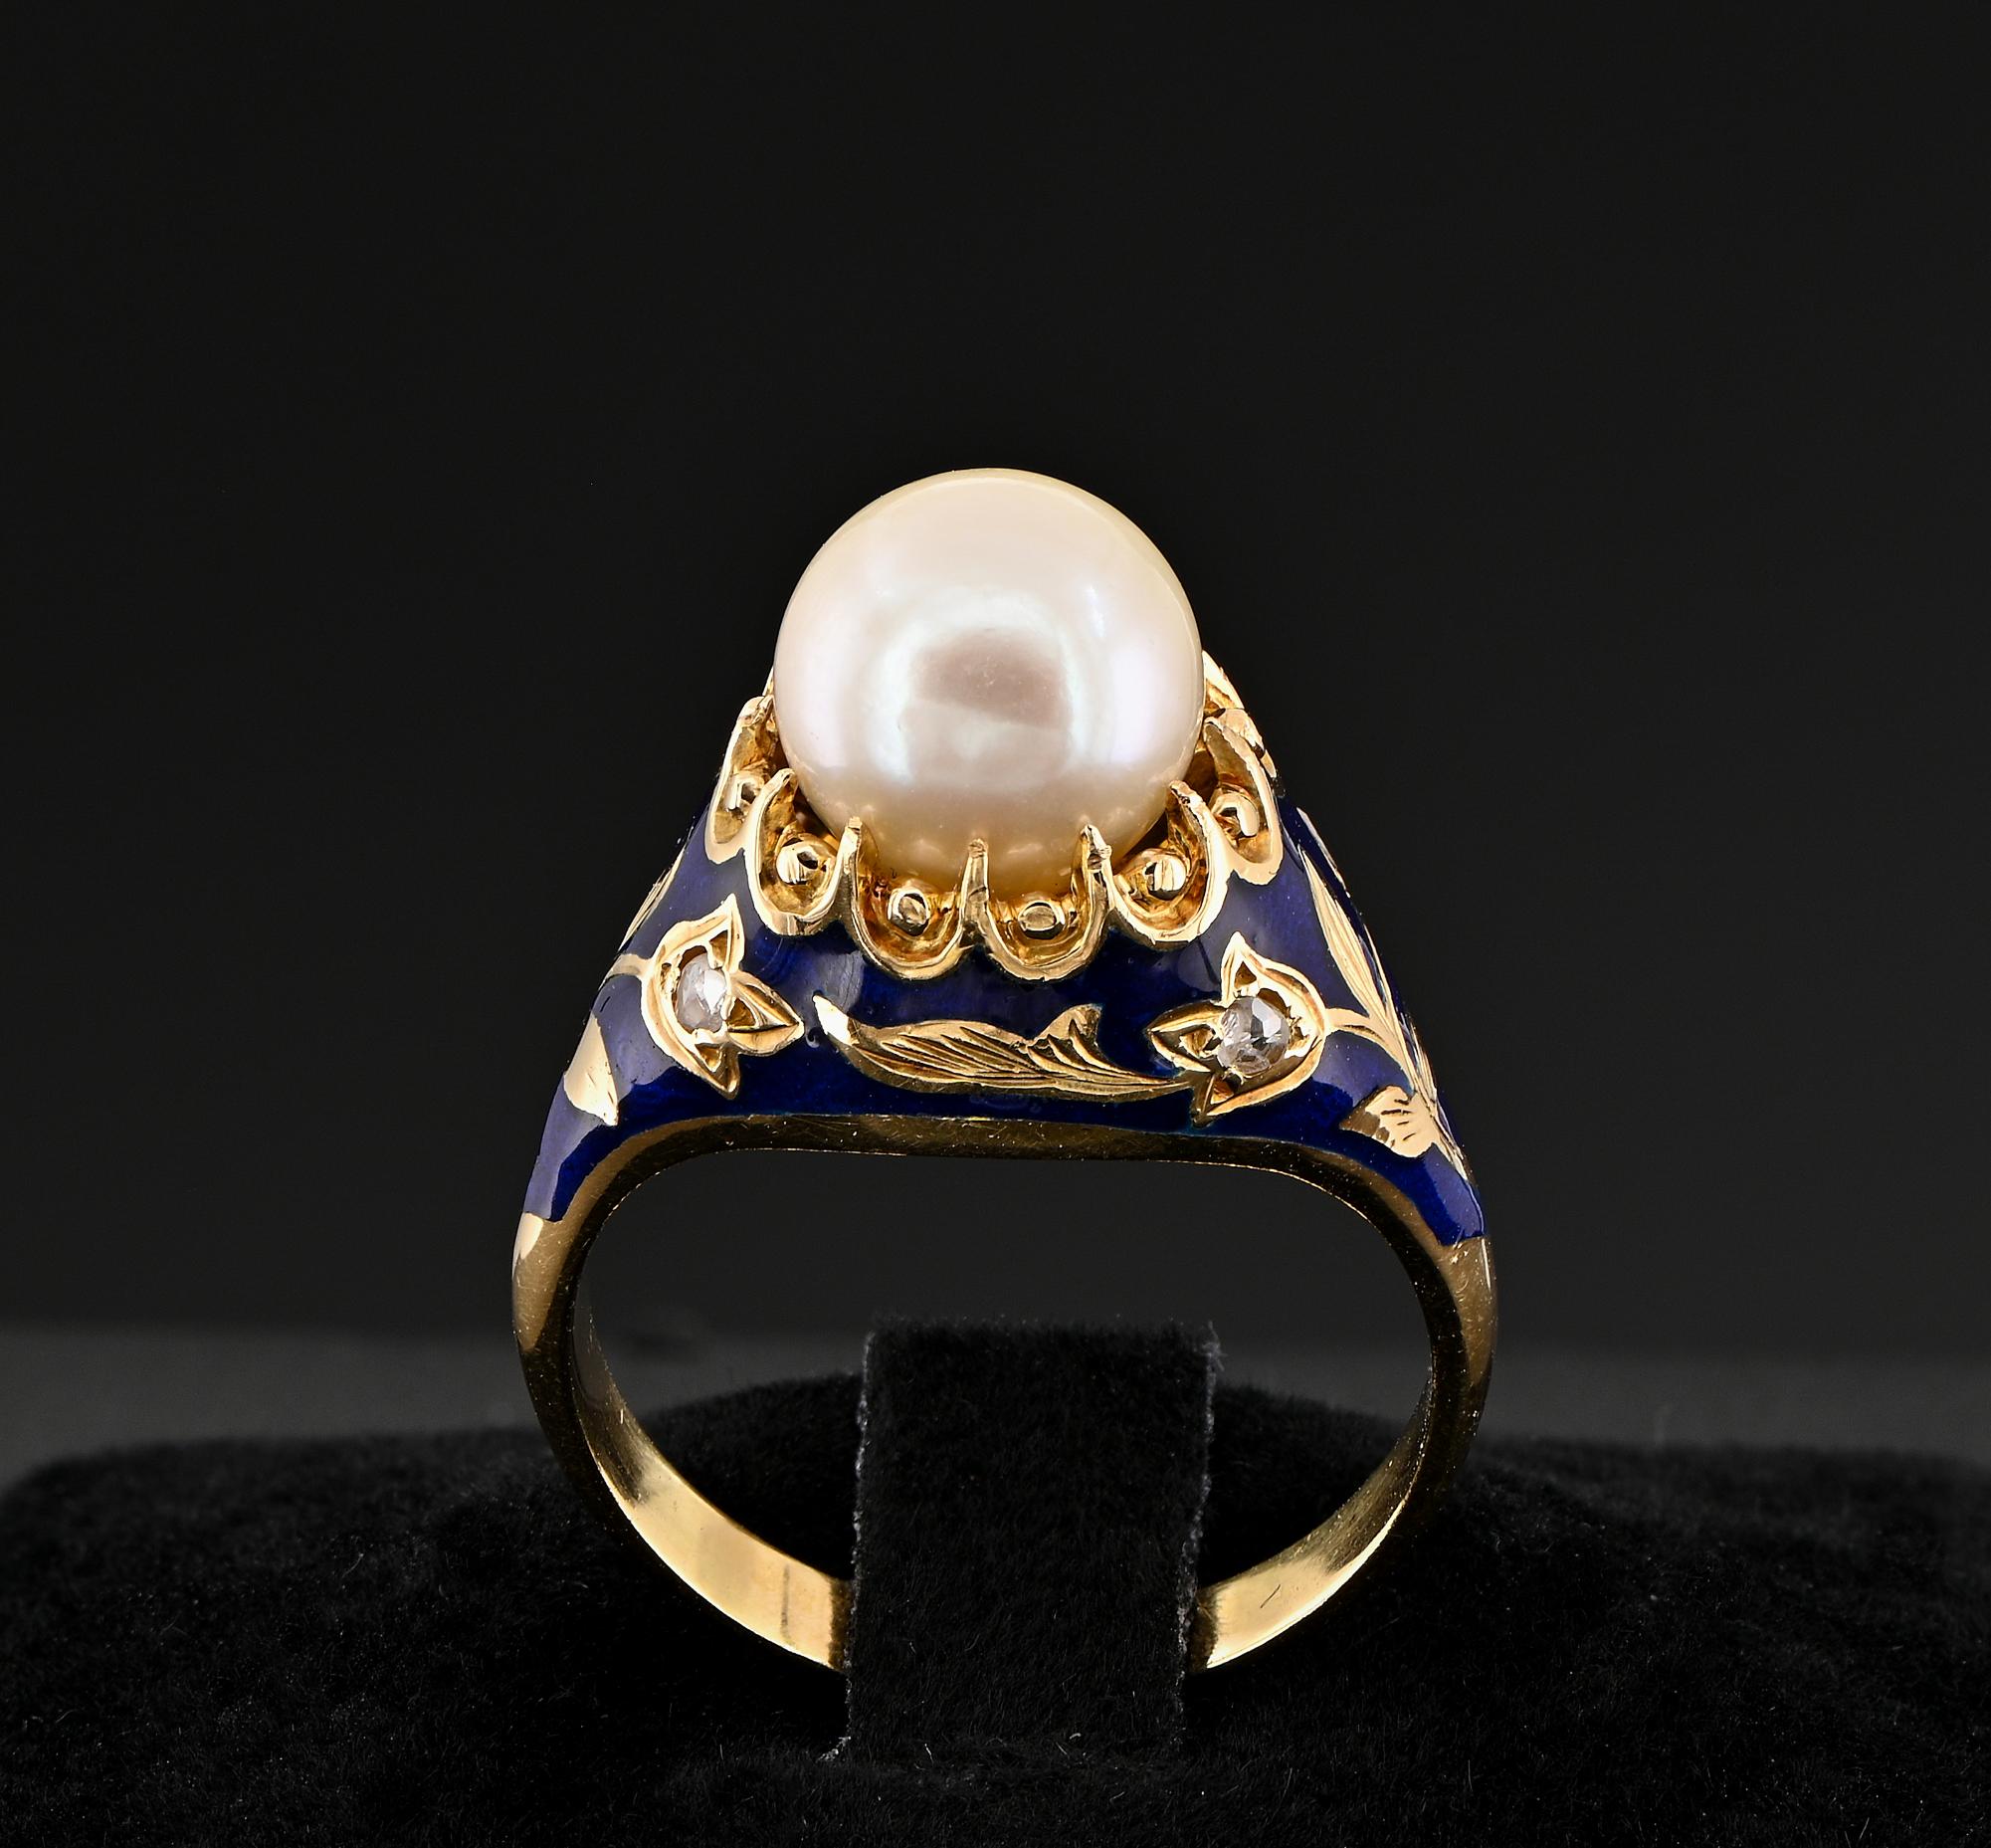 Nature on the Spot
This marvelous Art Nouveau period ring is 1905 ca
Superbly hand crafted of solid 18 Kt gold
Inspired by Nature, with a one off tasteful solitaire design, for a stunning main salt water Pearl centre and delightful rich Royal Blue